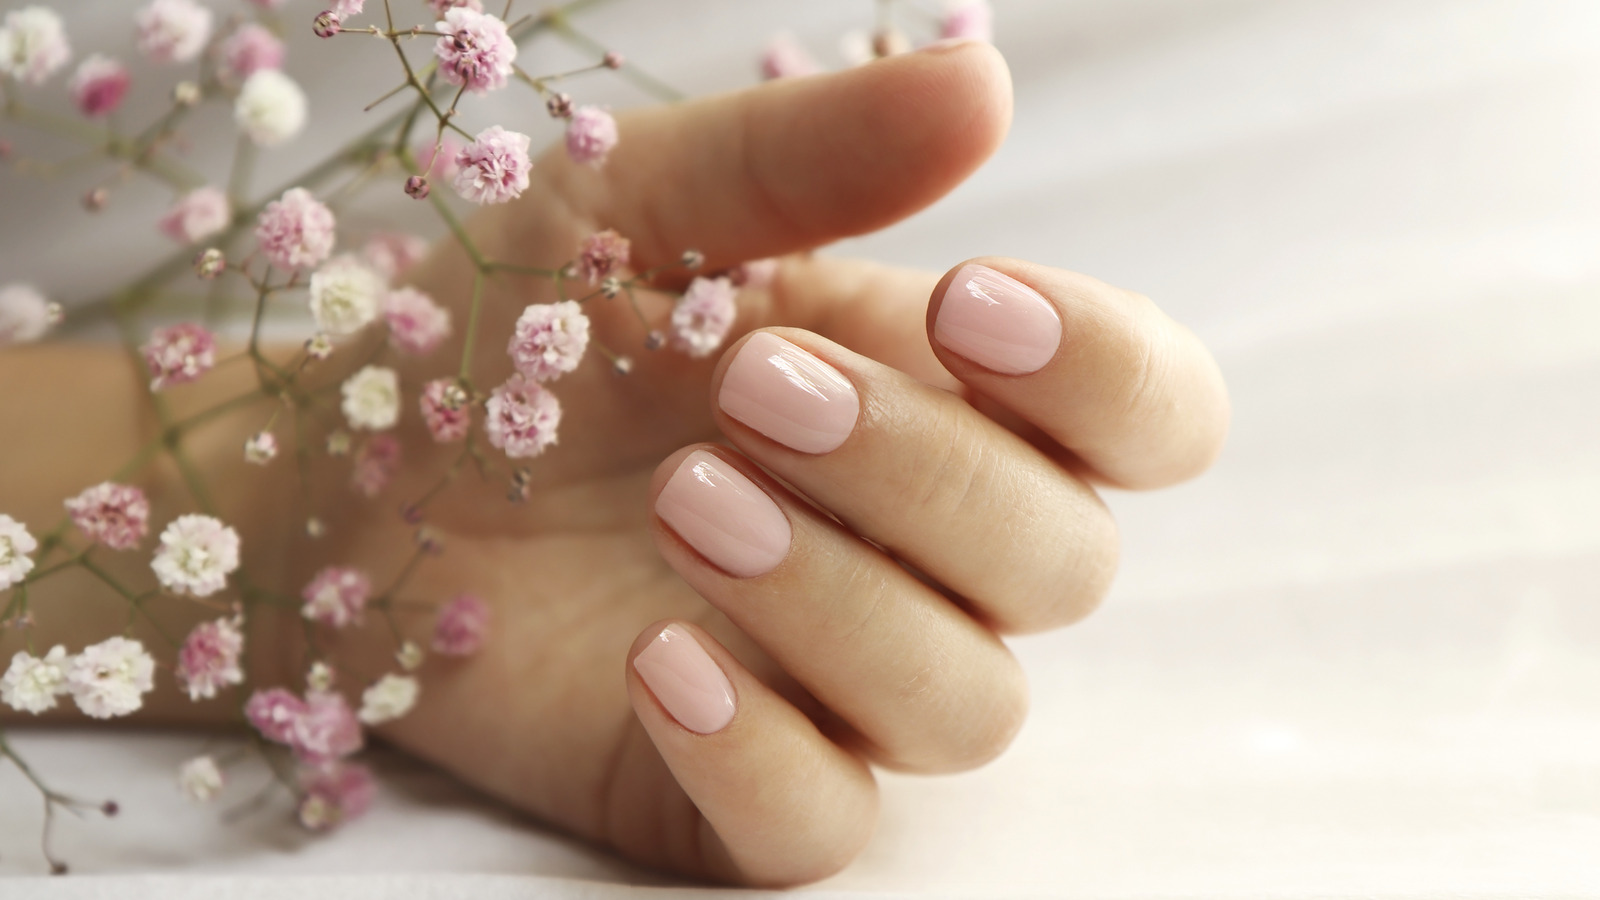 Learn Useful Tips To Become a Skillful Nail Artist